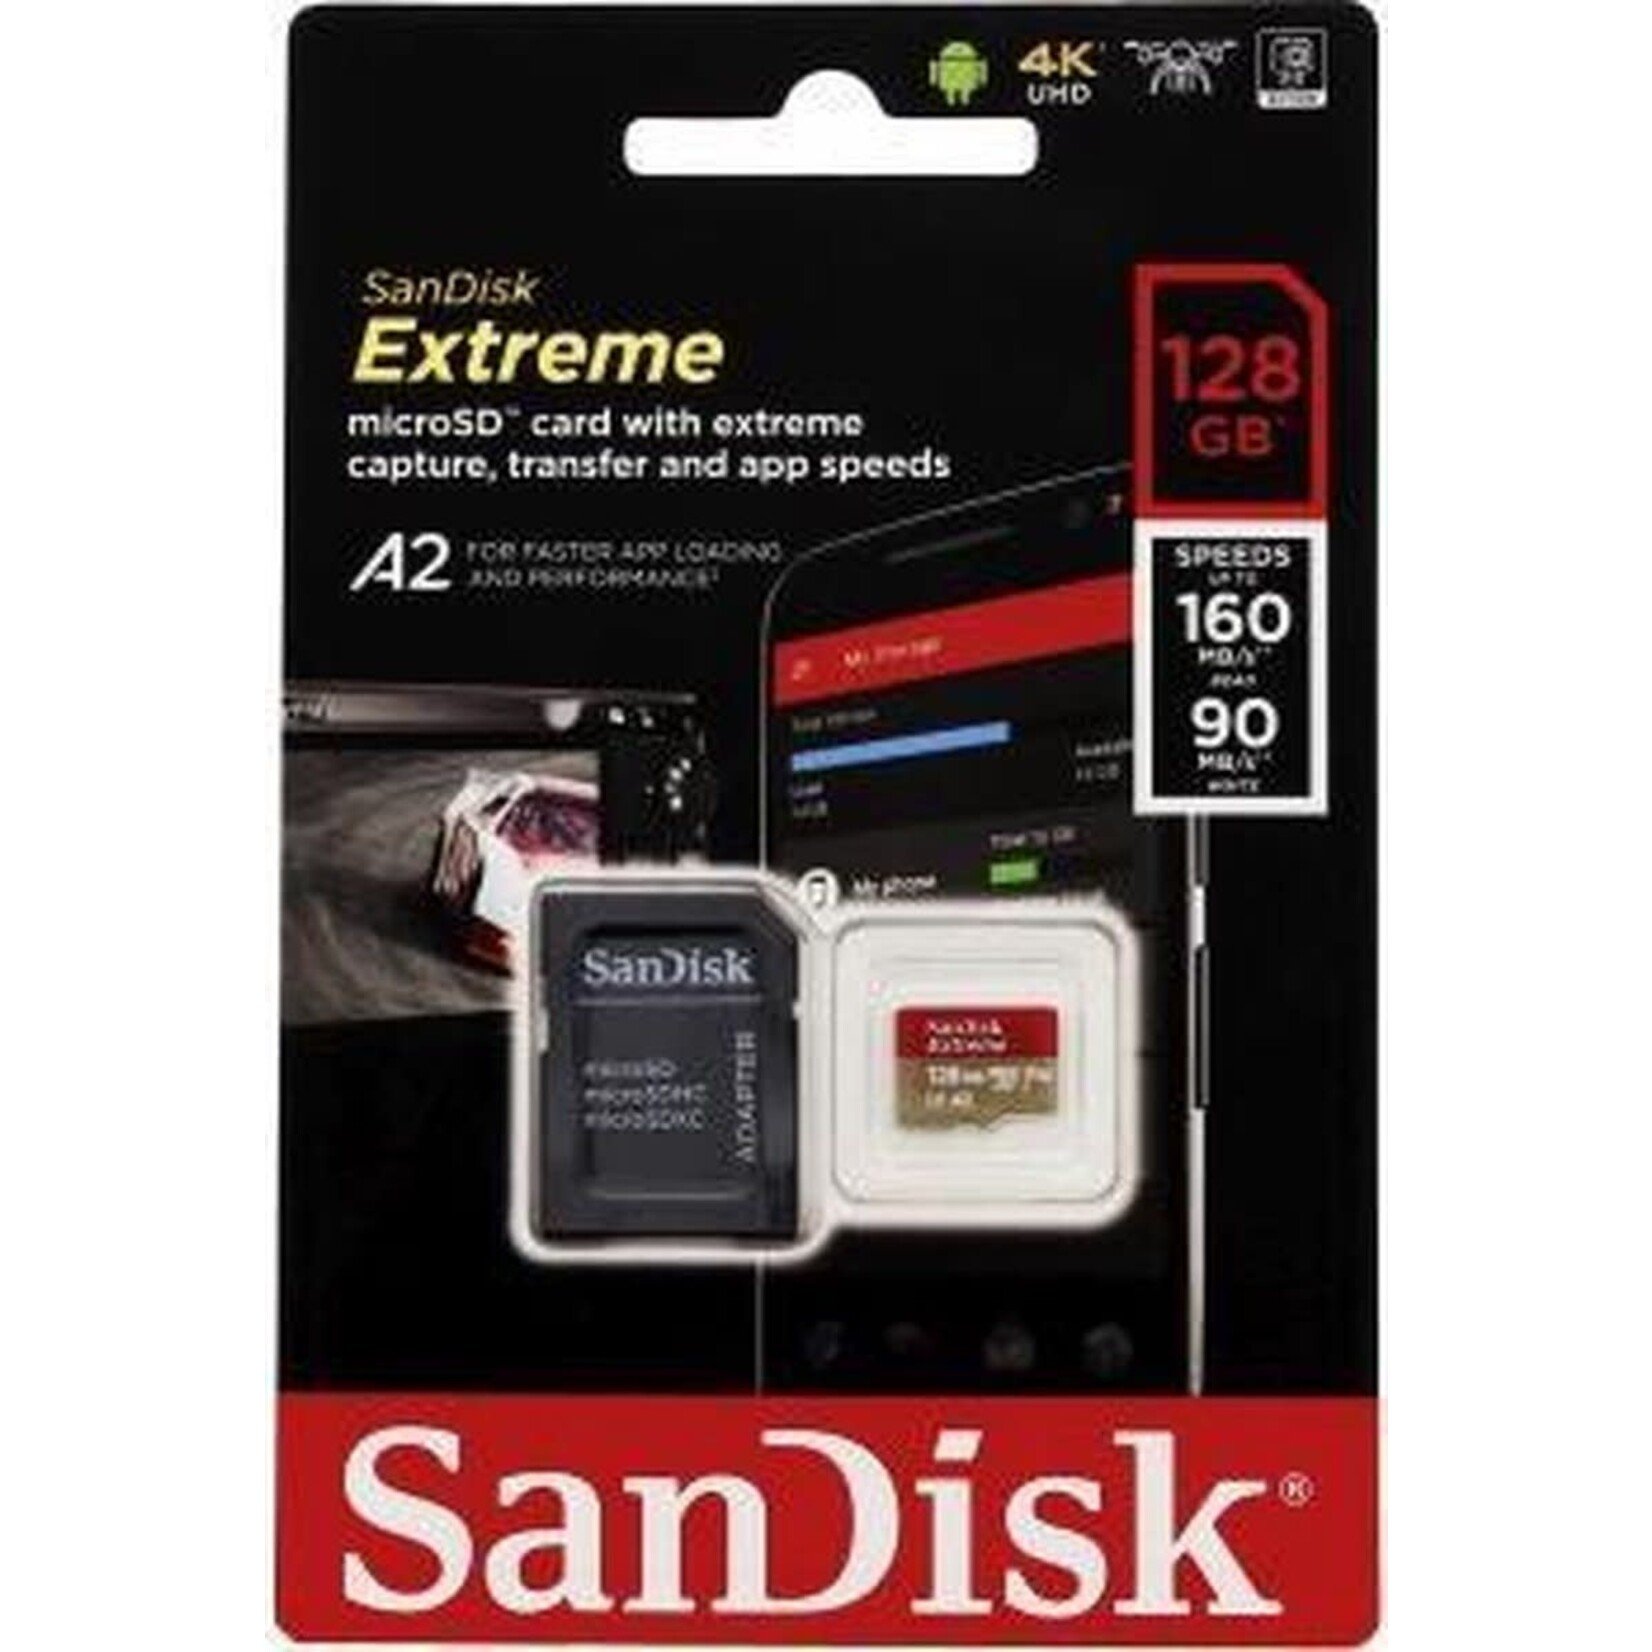 SanDisk SanDisk 128GB Extreme microSDXC UHS-I Memory Card with Adapter